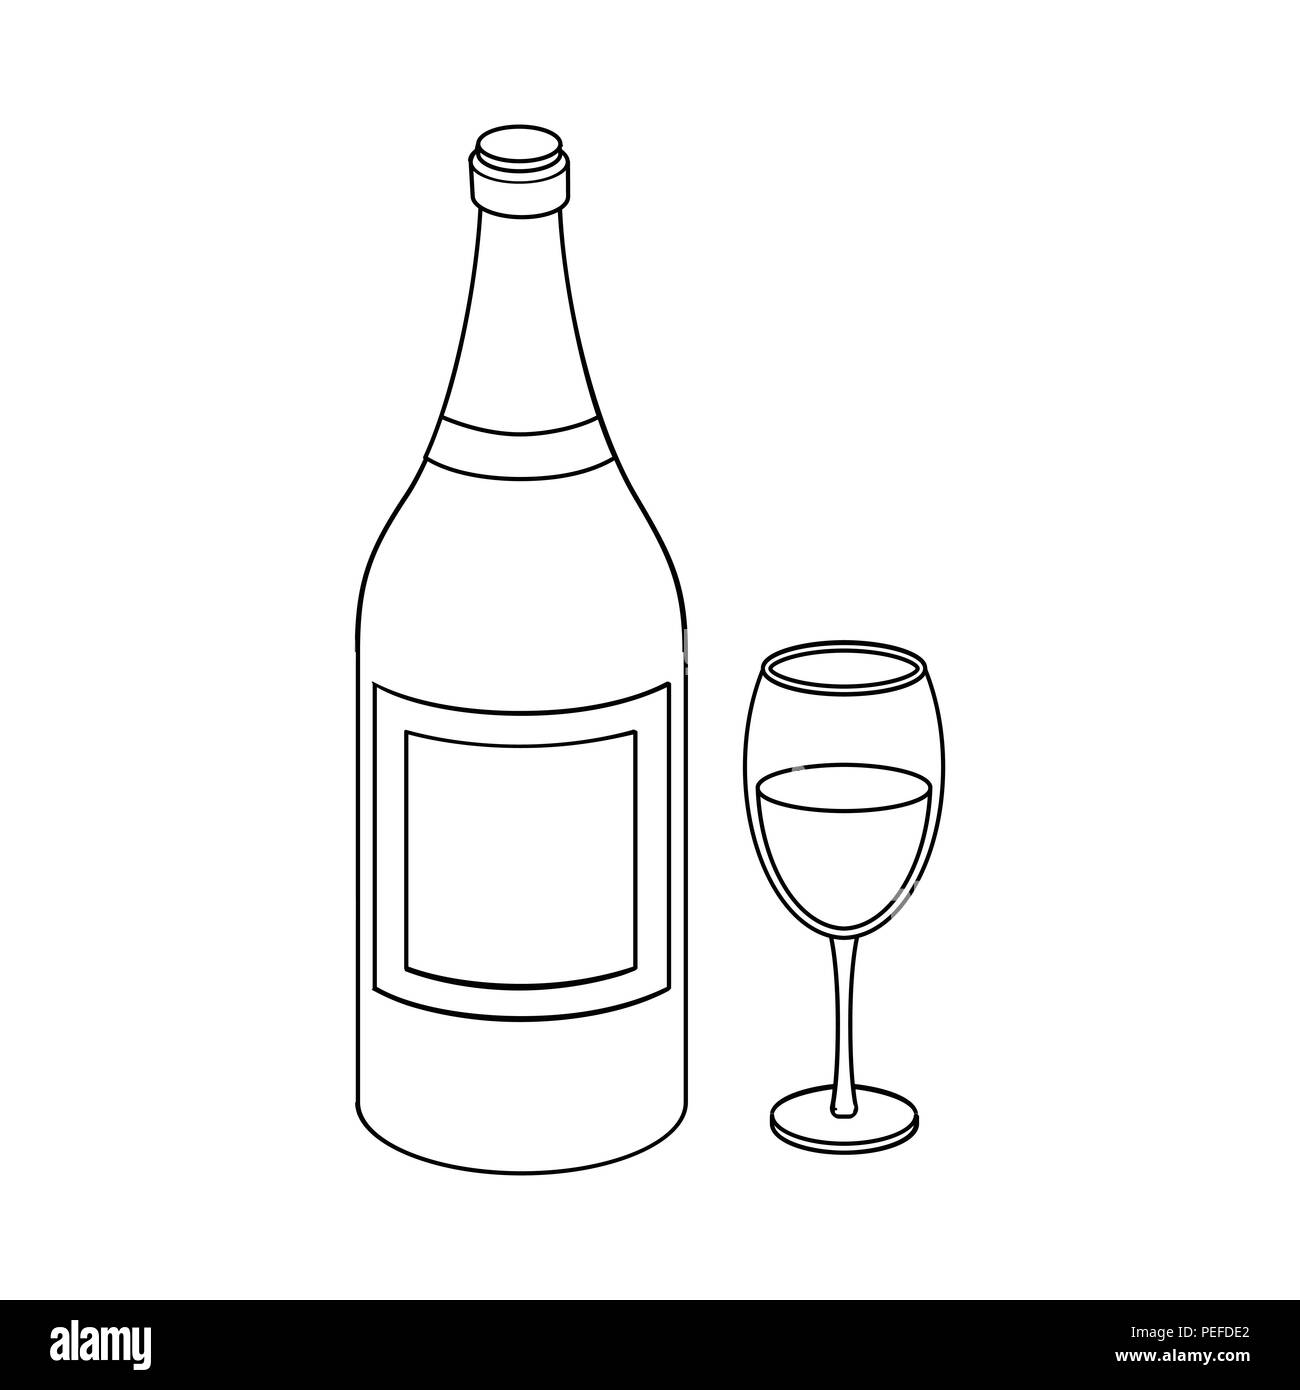 alcohol,art,background,bottle,bubble,bubbles,celebrate,celebration,champagne,cocktail,cold,design,drawing,drink,foil,glass,holiday,icon,illustration,isolated,liquid,logo,luxury,modern,object,outline,party,sign,symbol,toast,vector,web,wedding,white,wine, Vector Vectors , Stock Vector